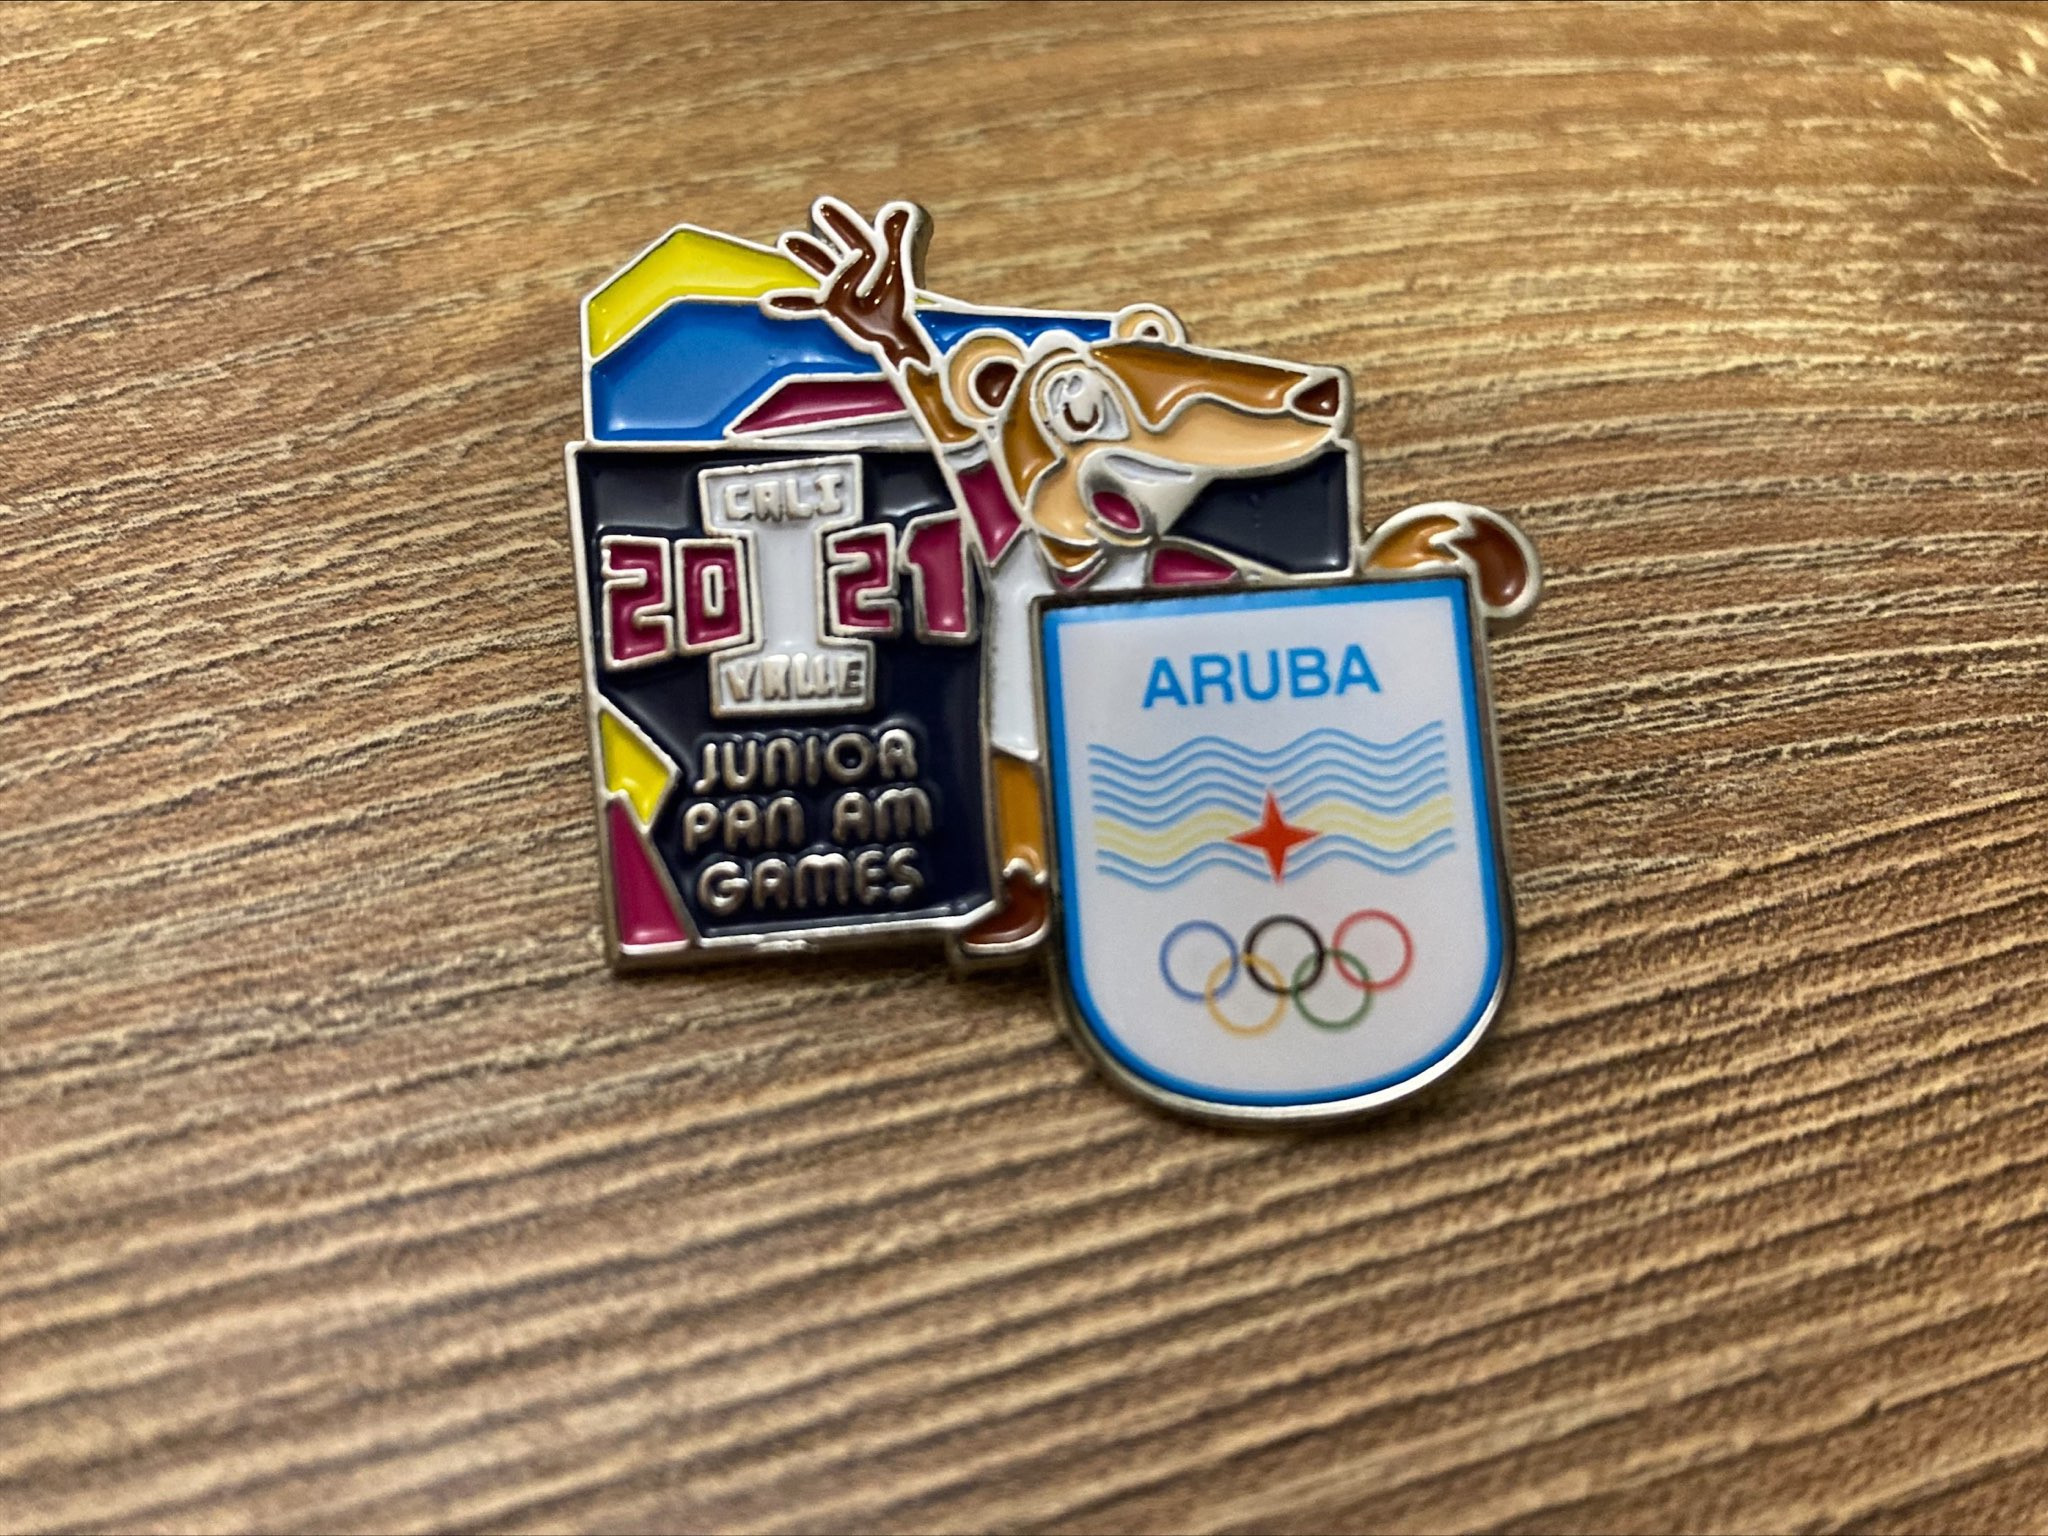 Pin collectors seize the day at Junior Pan American Games in Cali